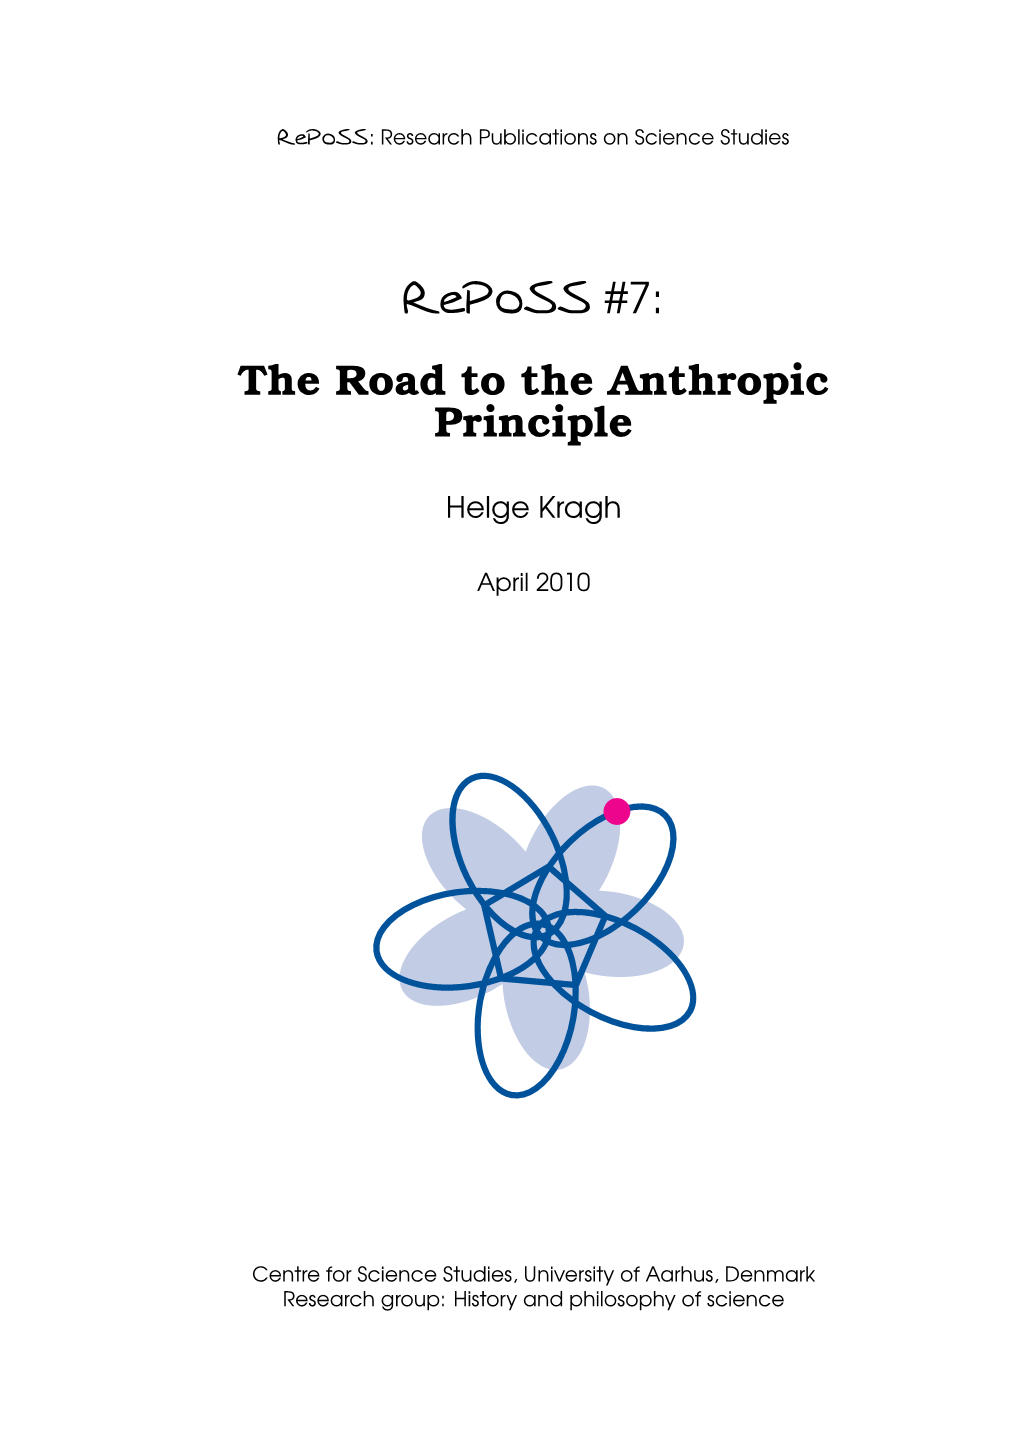 Reposs #7: the Road to the Anthropic Principle